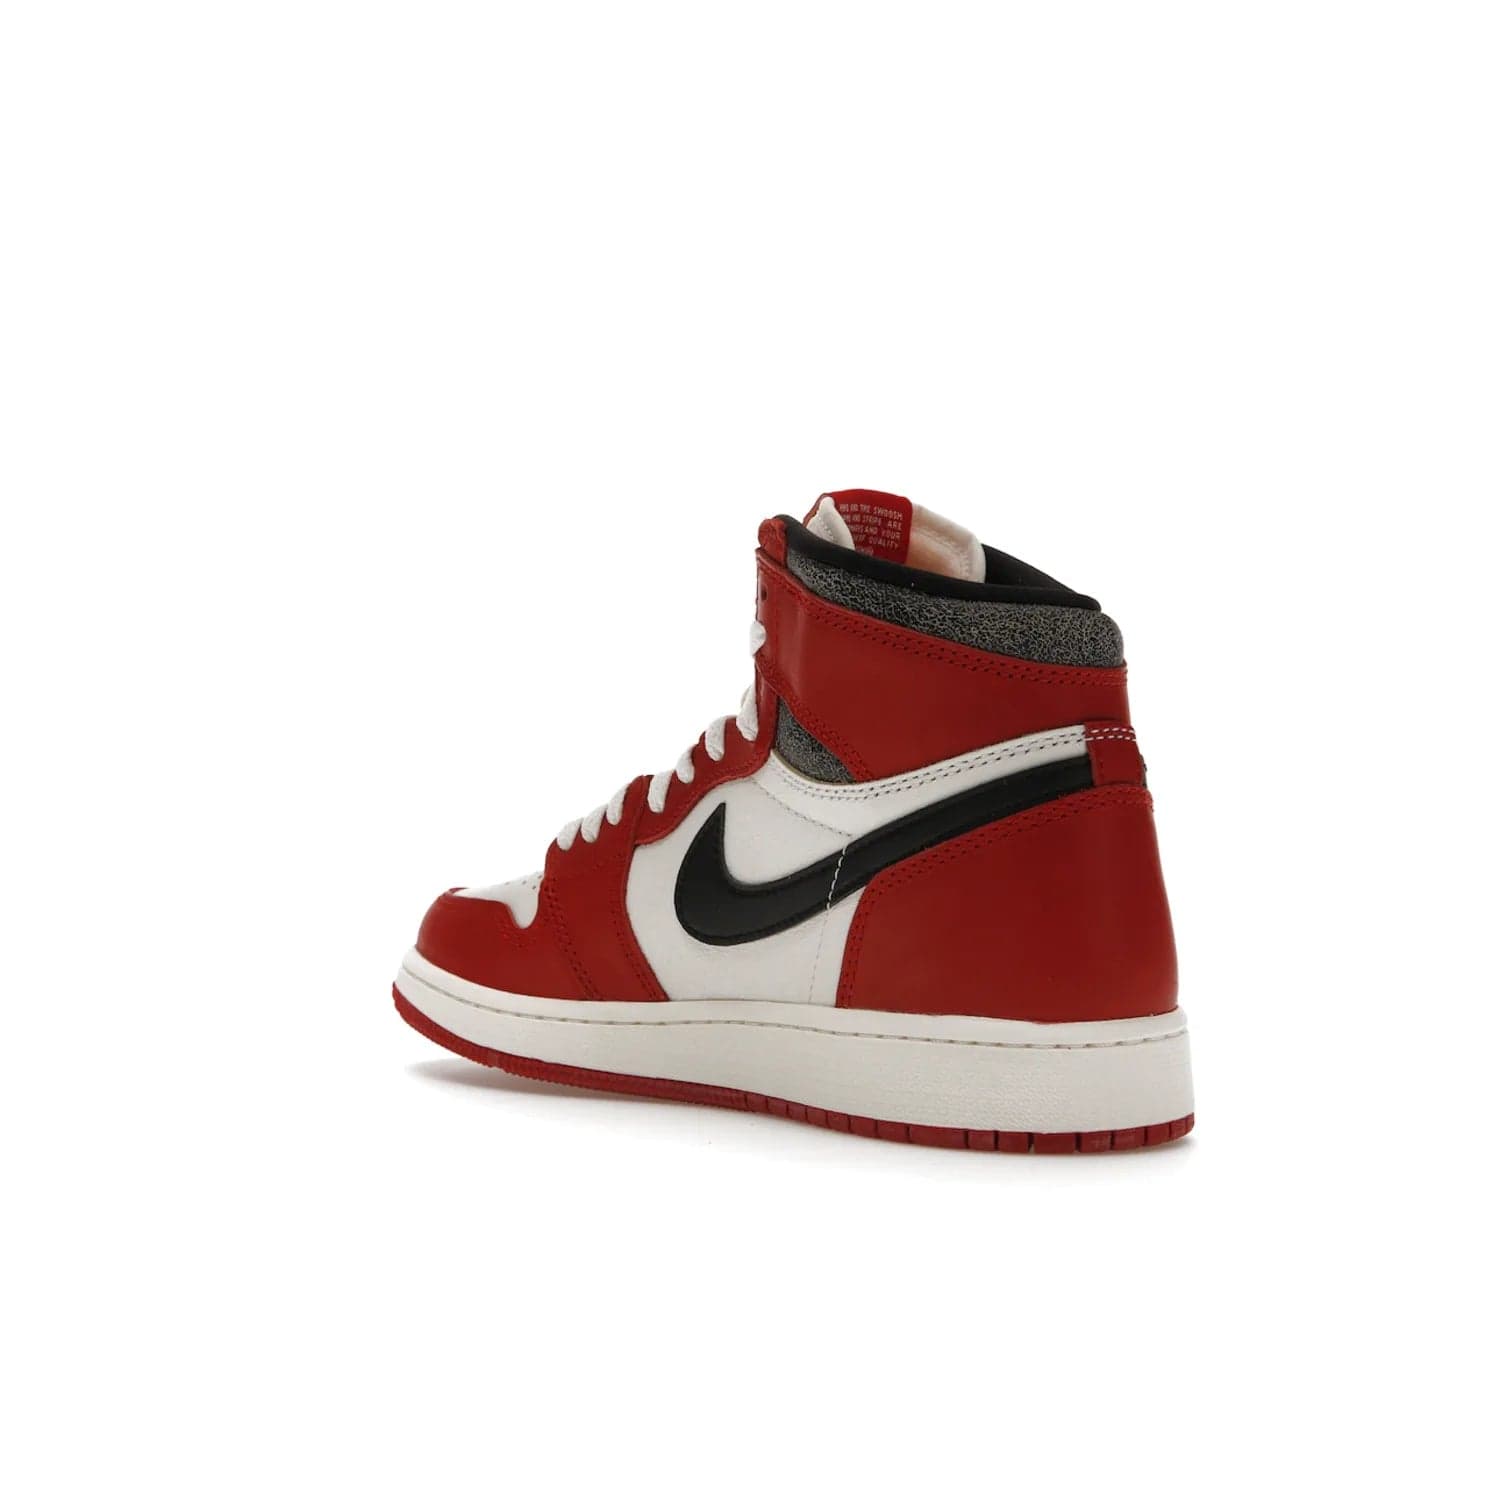 Jordan 1 Retro High OG Chicago Lost and Found (GS) - Image 24 - Only at www.BallersClubKickz.com - Grab the Air Jordan 1 Retro High OG Chicago Reimagined GS, presenting in classic 1985 silhouette. Varsity Red, Black, Muslin and Sail hues, featuring Nike Air branding, Wings on the collars and printed insoles. Don't miss out when it releases 19th Nov 2022.